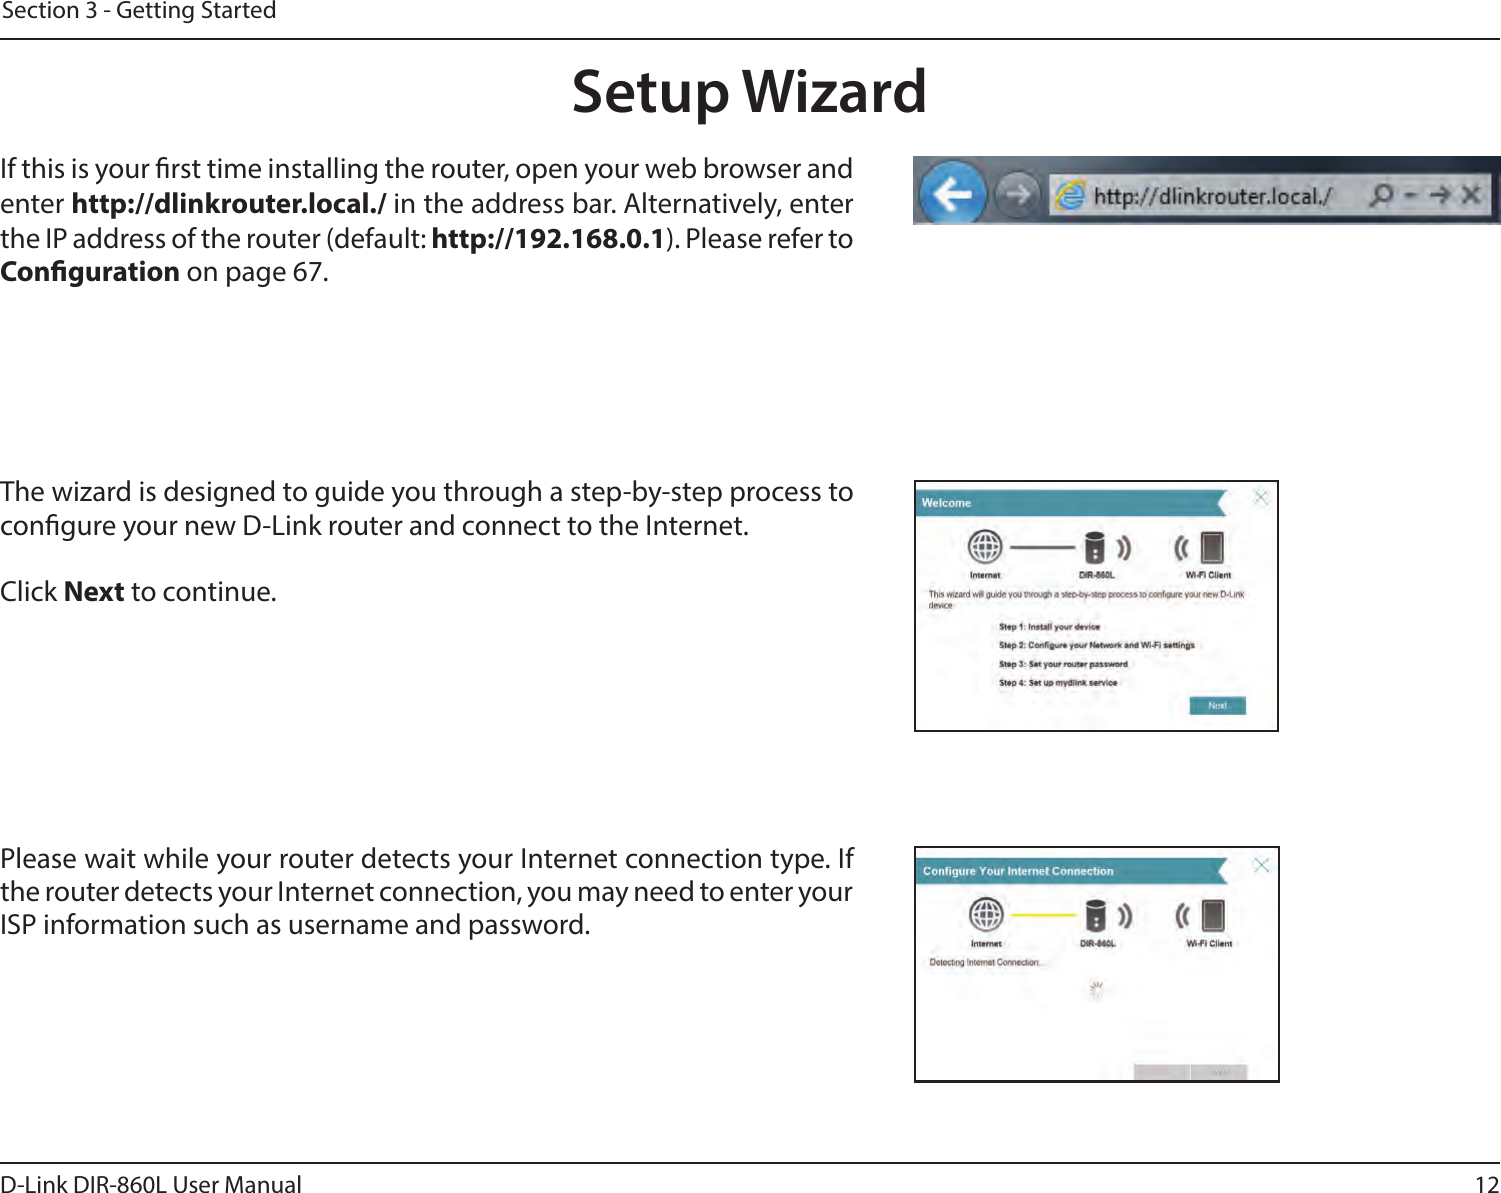 12D-Link DIR-860L User ManualSection 3 - Getting StartedThe wizard is designed to guide you through a step-by-step process to congure your new D-Link router and connect to the Internet.Click Next to continue. Setup WizardIf this is your rst time installing the router, open your web browser and enter http://dlinkrouter.local./ in the address bar. Alternatively, enter the IP address of the router (default: http://192.168.0.1). Please refer to Conguration on page 67.Please wait while your router detects your Internet connection type. If the router detects your Internet connection, you may need to enter your ISP information such as username and password.